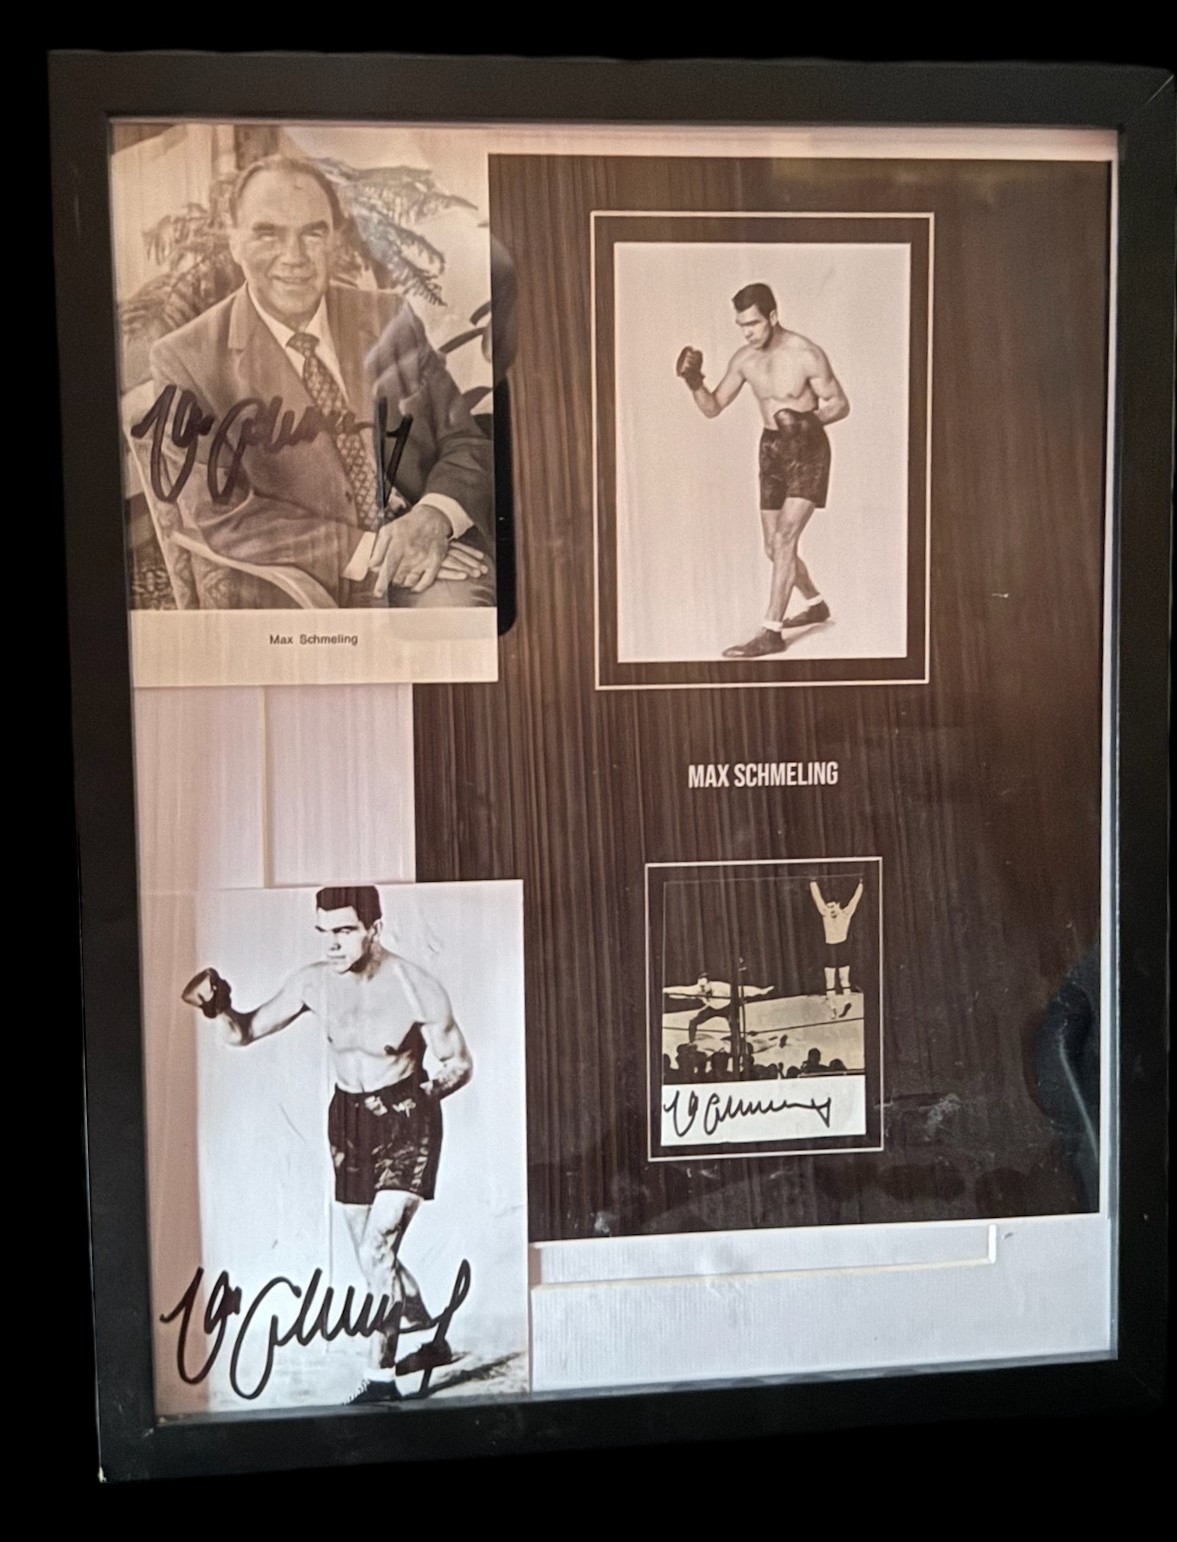 Max Schmeling 15x12 inch overall framed and mounted signature display includes three signed black